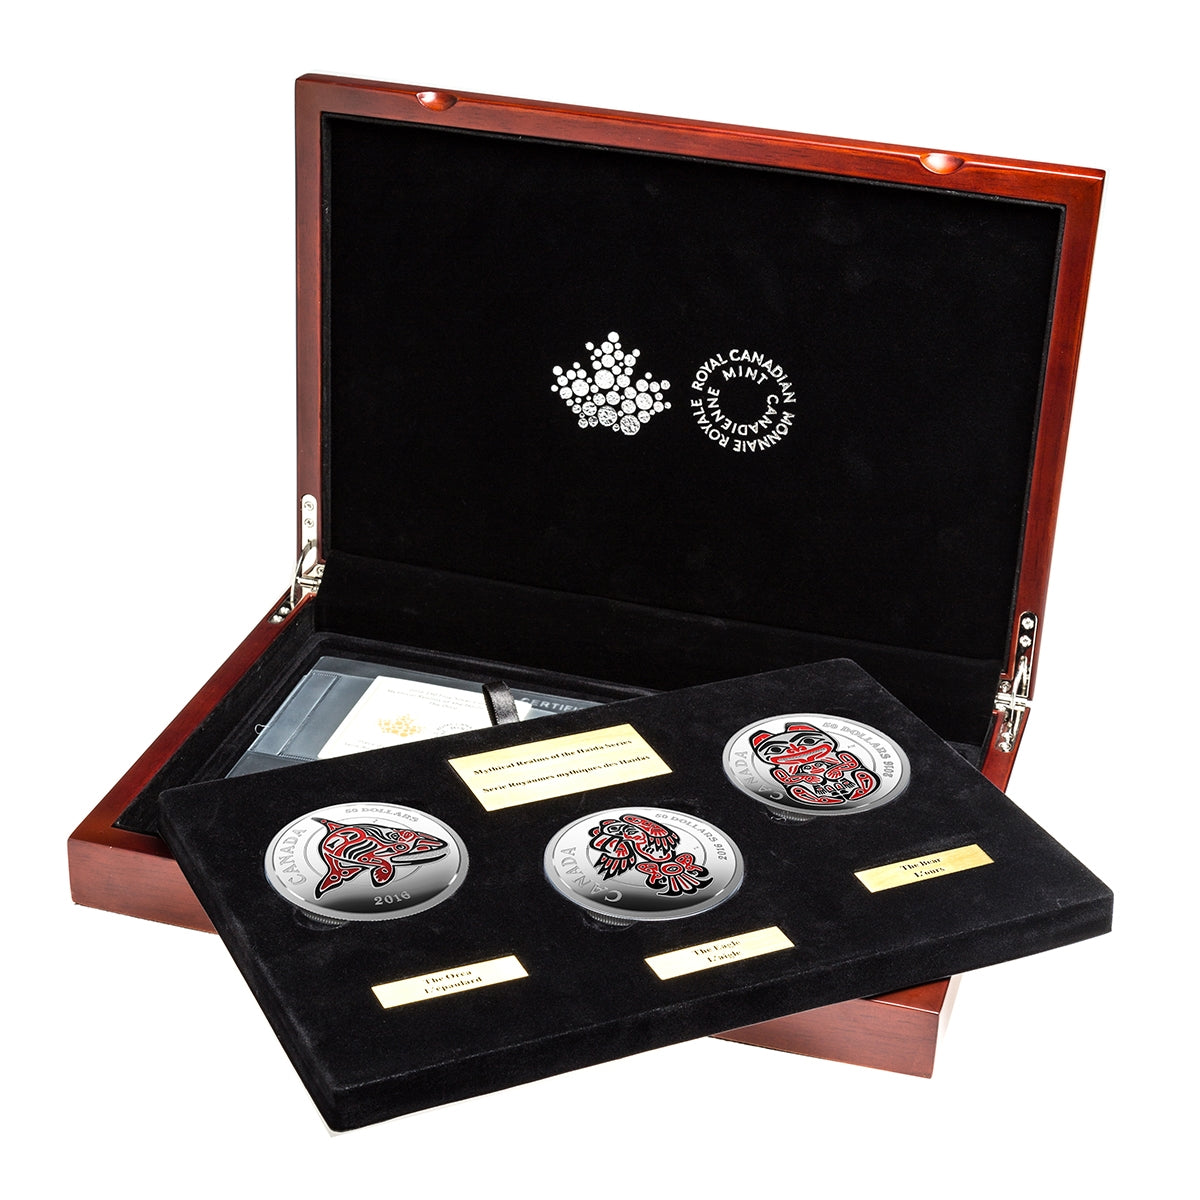 5 oz. Fine Silver 3-Coin Set - Mythical Realms of the Haida Series - Mintage: 1,500 (2016)